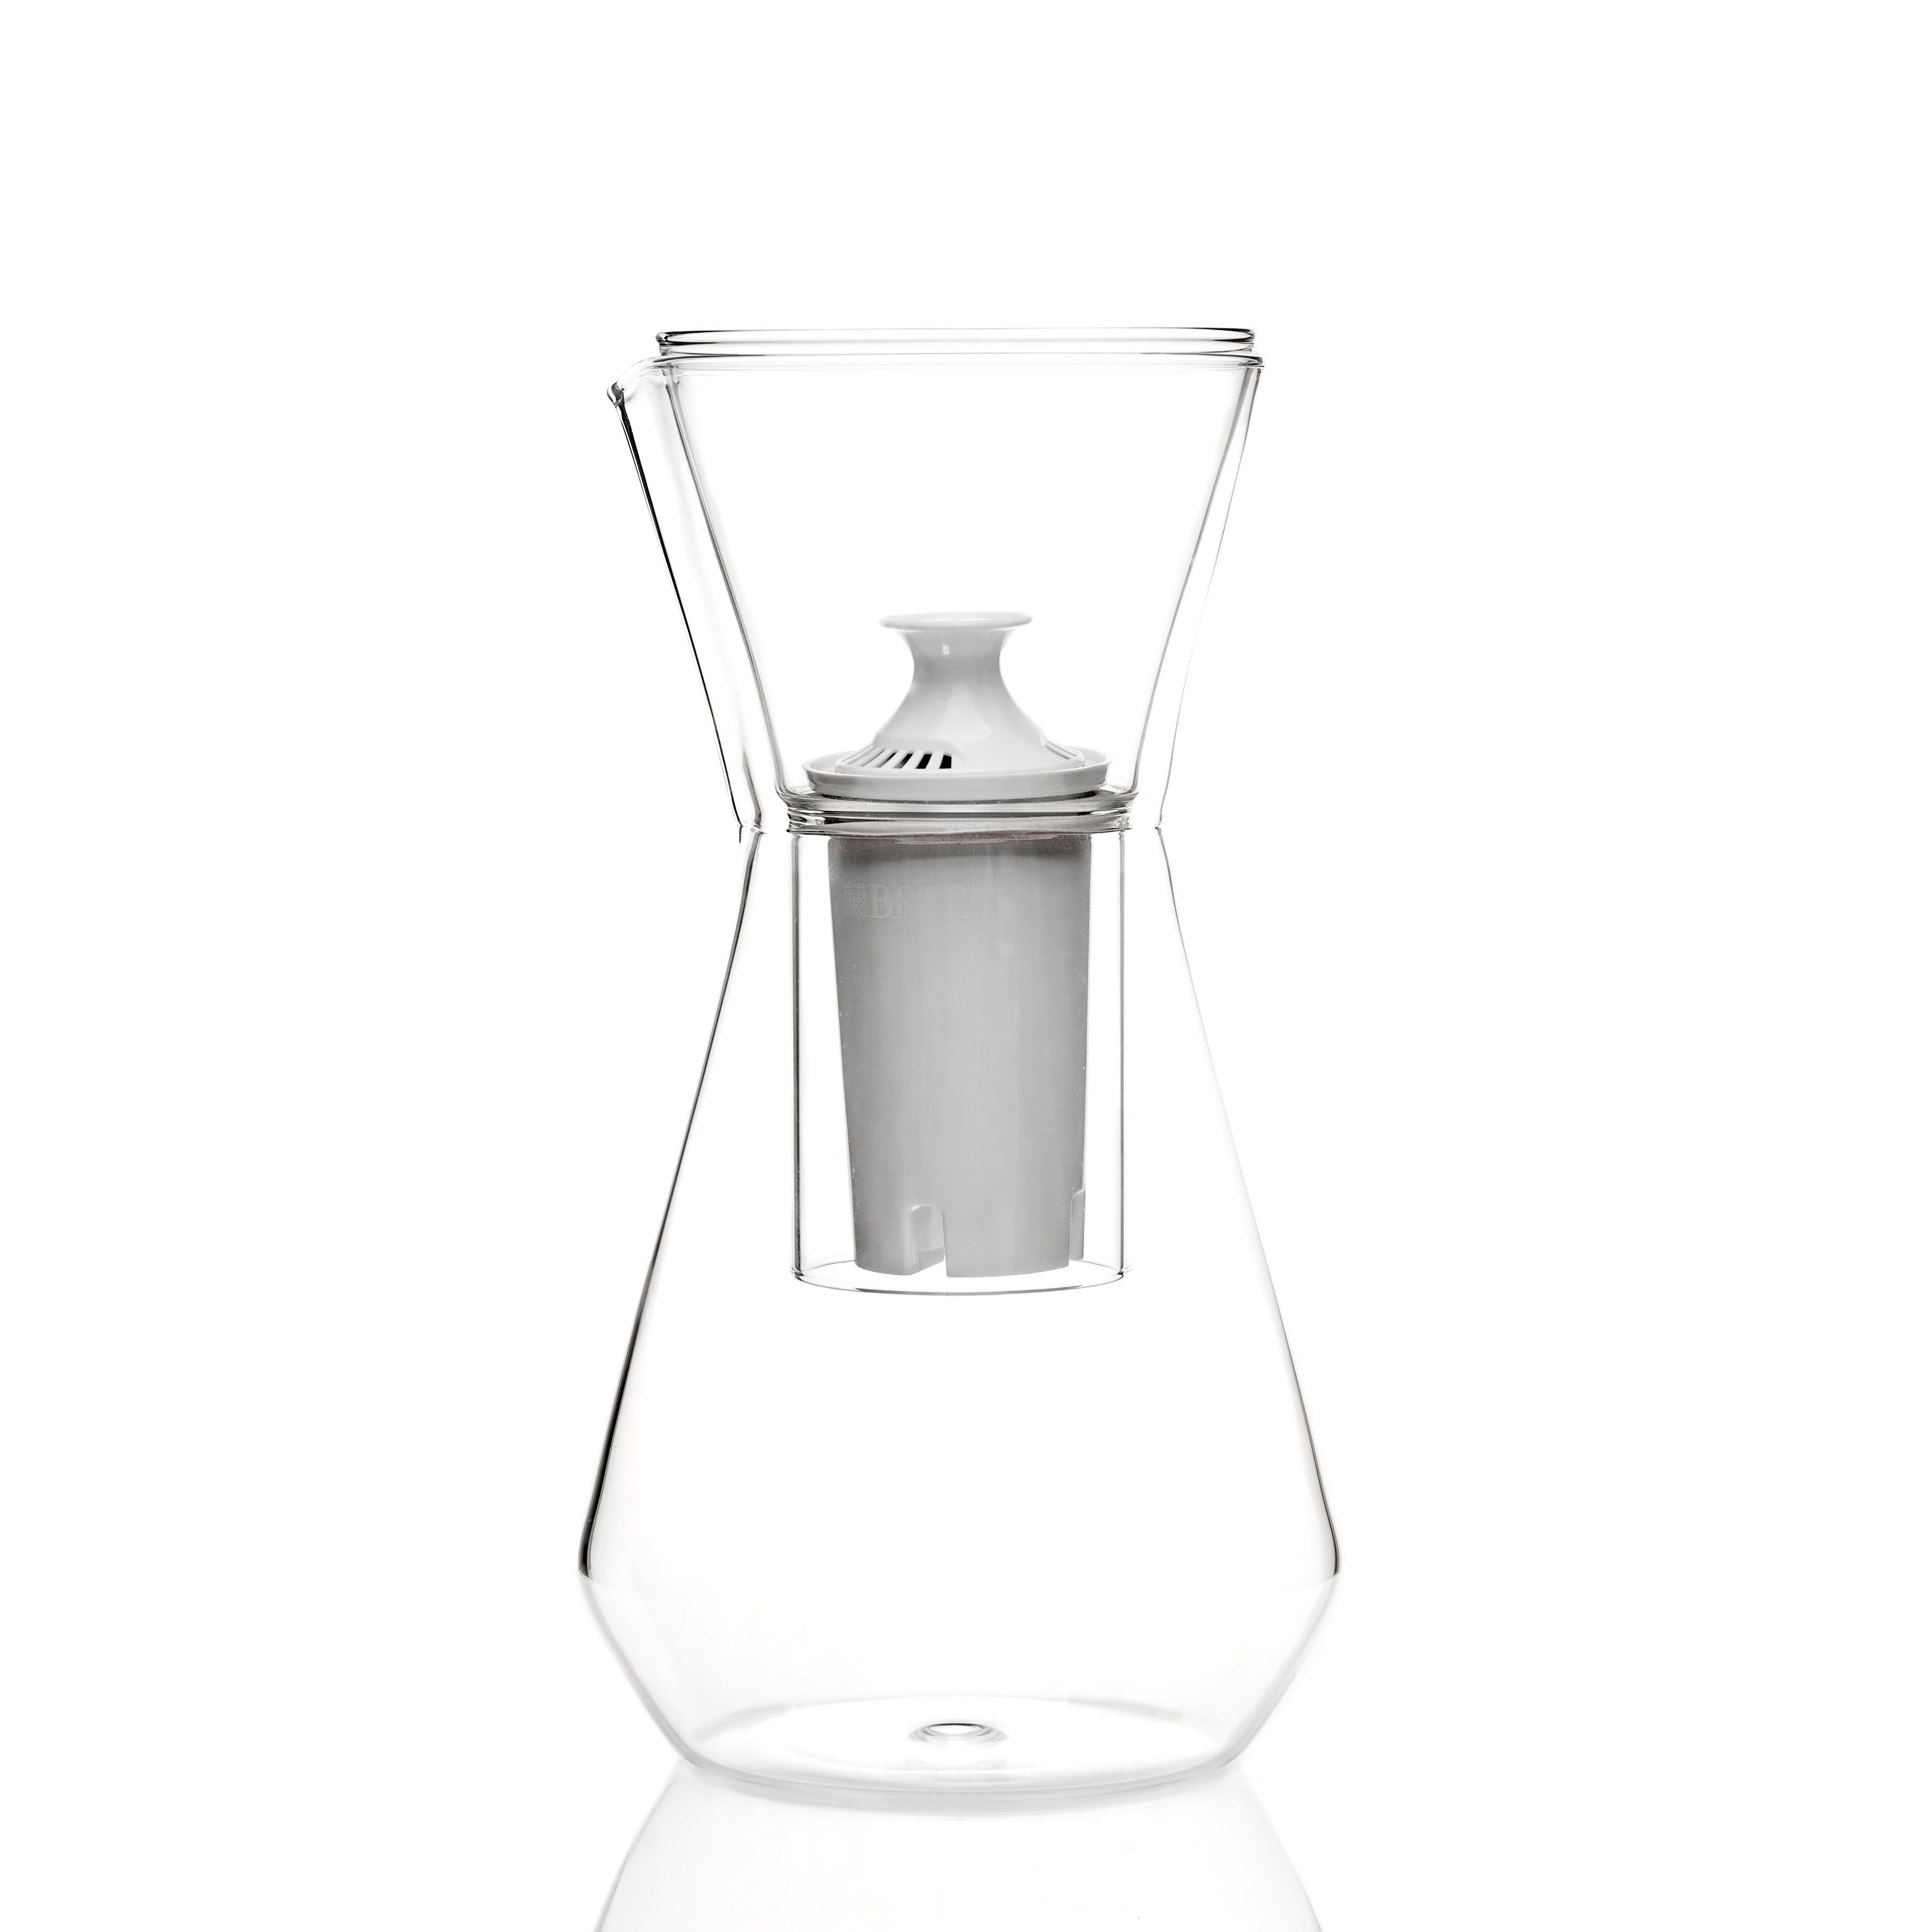 Listing for EU clients and clients who want shipments from Italy.

Finding the beauty in a simple, everyday object is one of the joys of life. Be it left out on your counter or table the contemporary clear glass Talise water carafe pitcher is